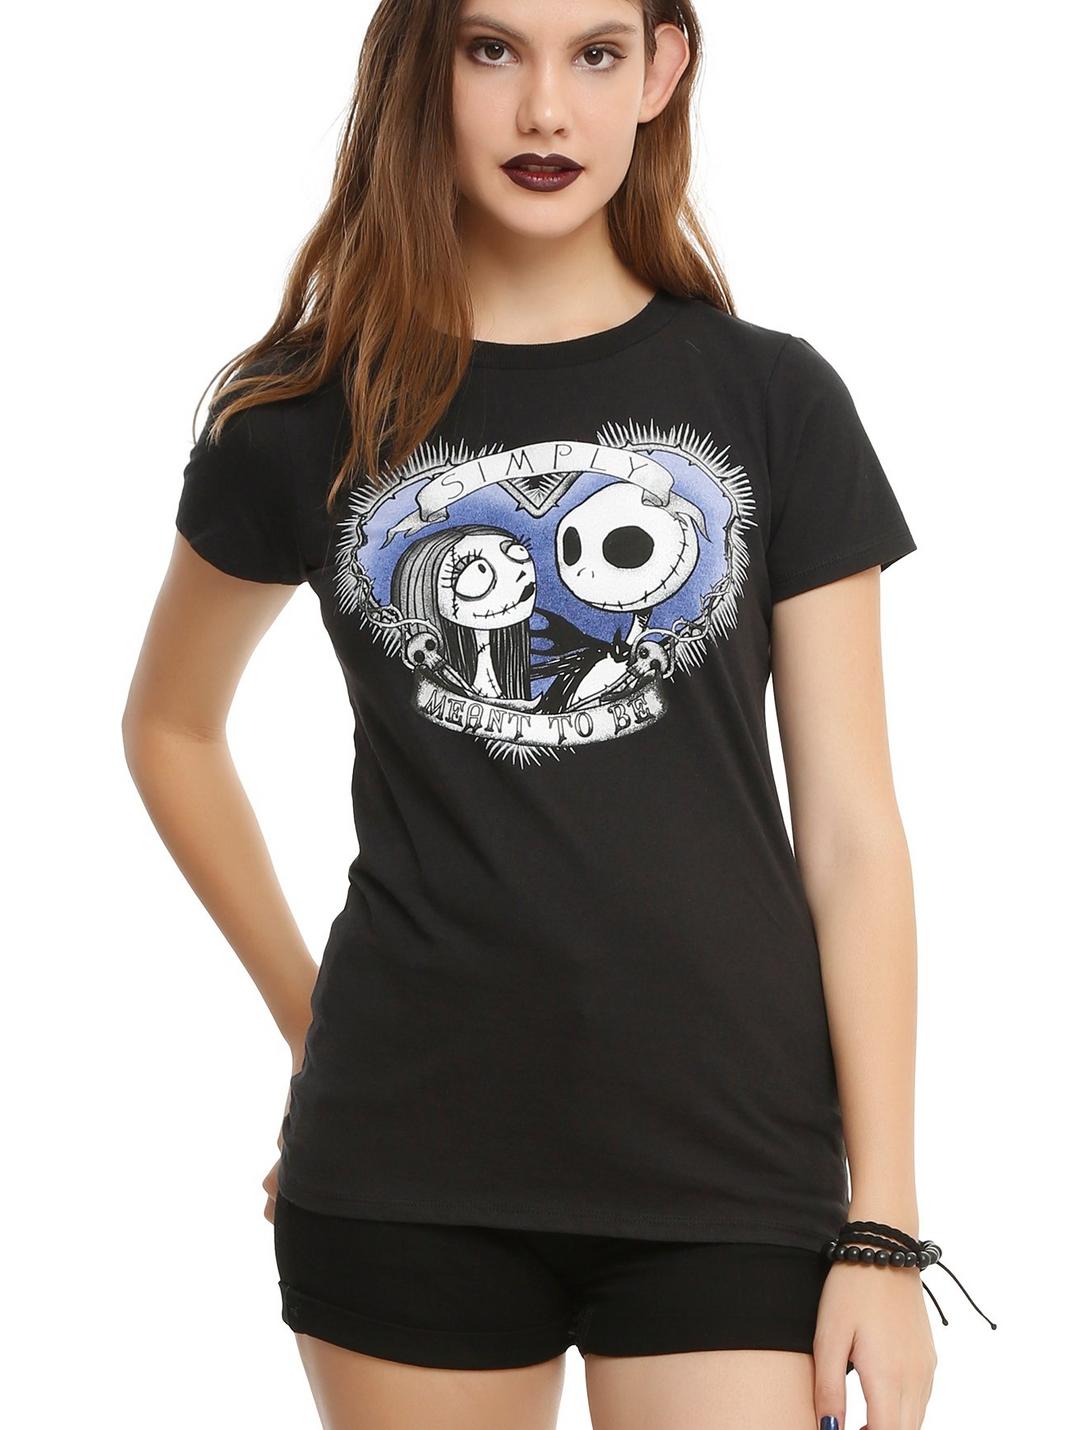 The Nightmare Before Christmas Simply Meant To Be Girls T-Shirt, BLACK, hi-res